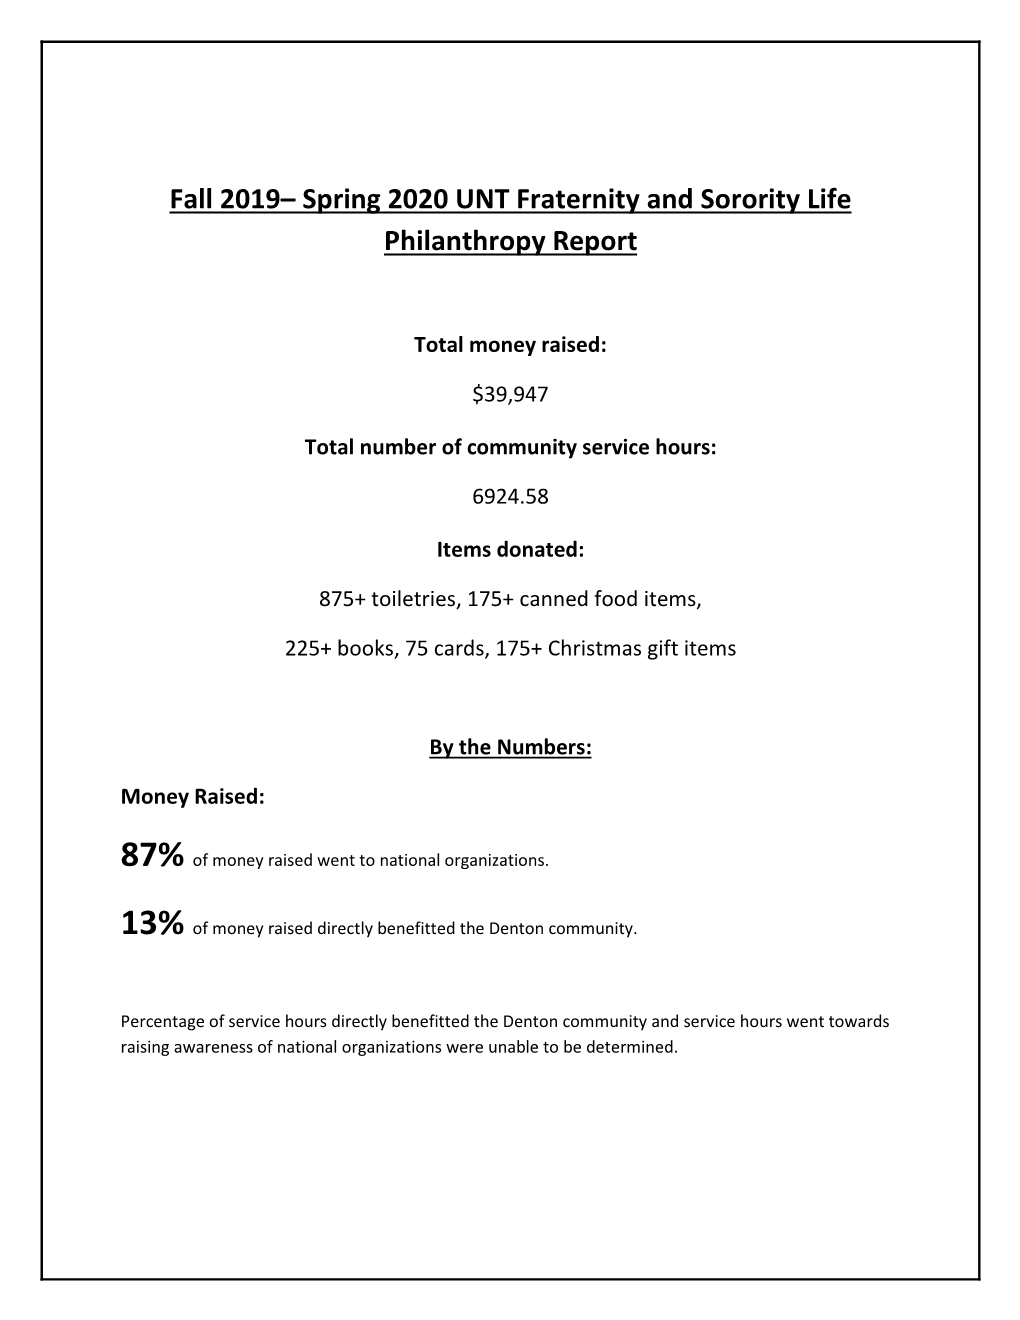 Fall 2019– Spring 2020 UNT Fraternity and Sorority Life Philanthropy Report